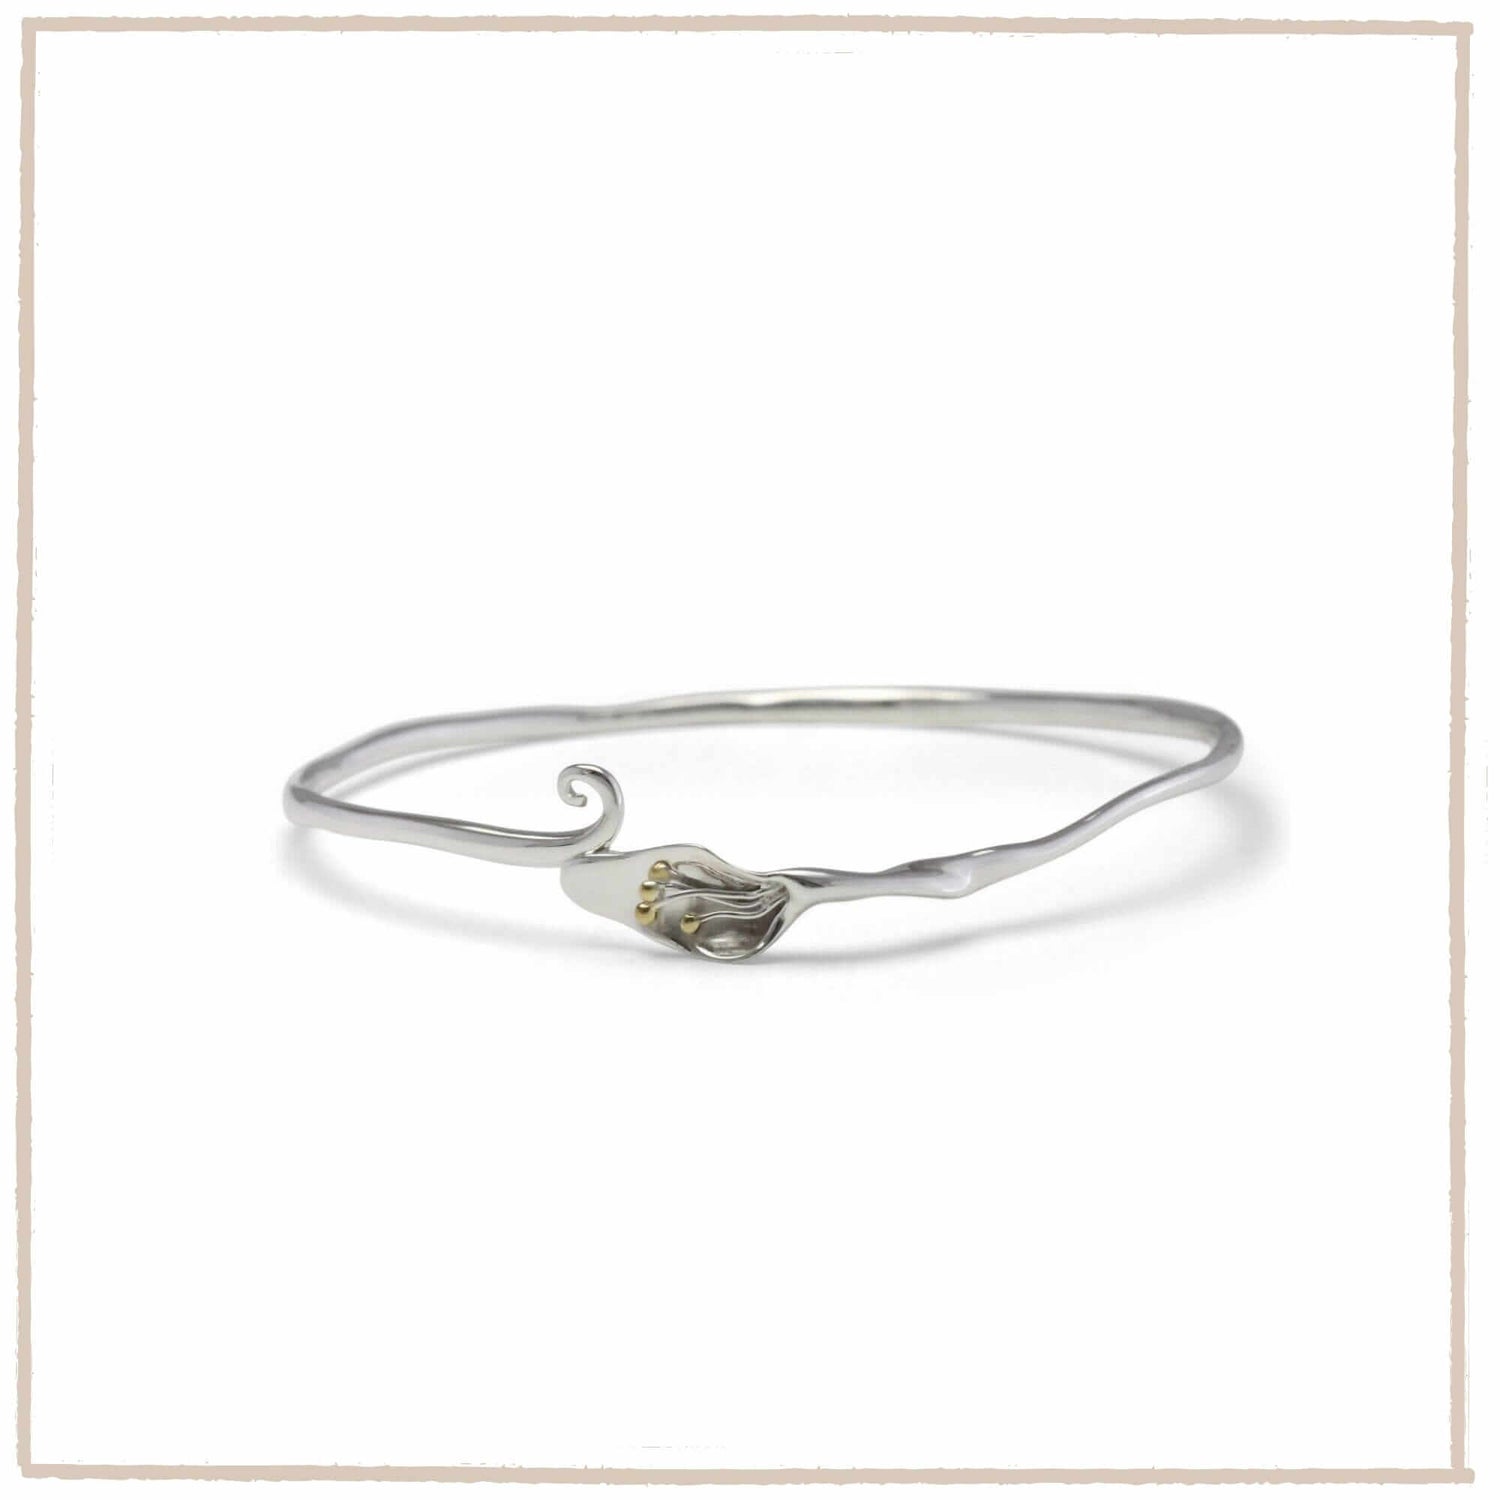 Bracelets & Bangles & 925 sterling silver jewellery collections at Twelve Silver Trees Jewellery & Gifts